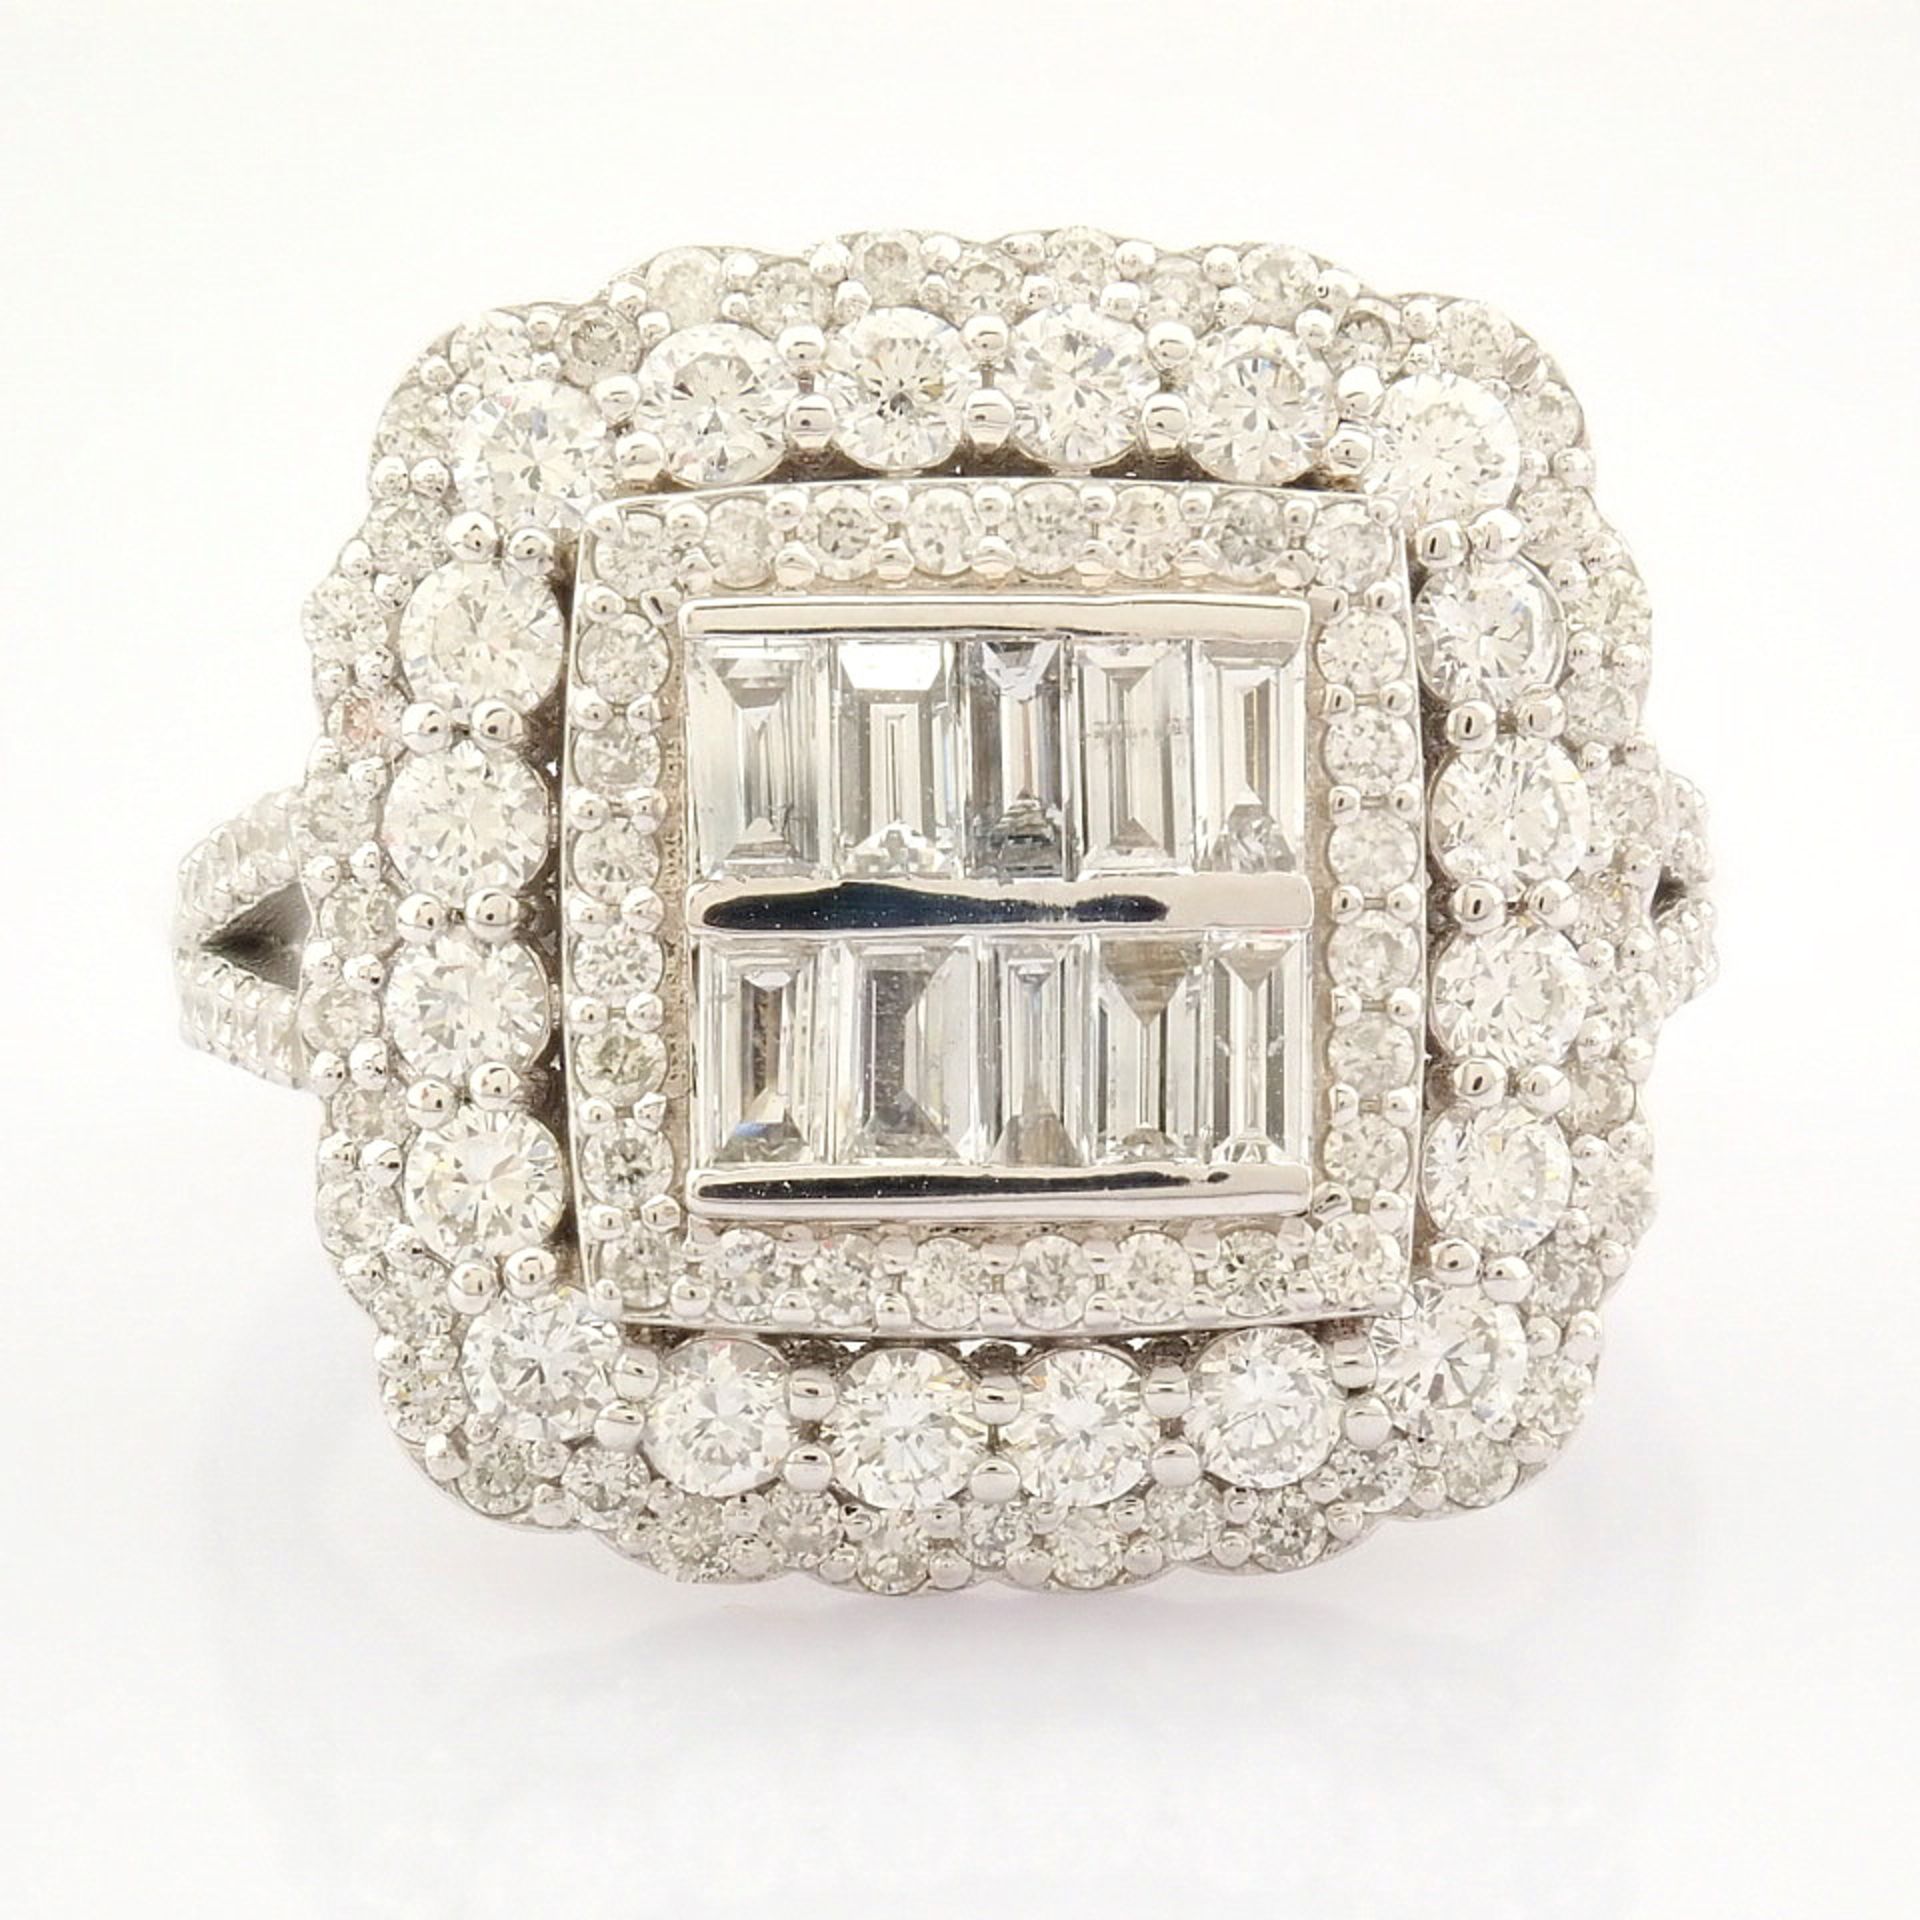 Certificated 14K White Gold Baguette Diamond & Diamond Ring (Total 1.6 ct Stone) - Image 4 of 6